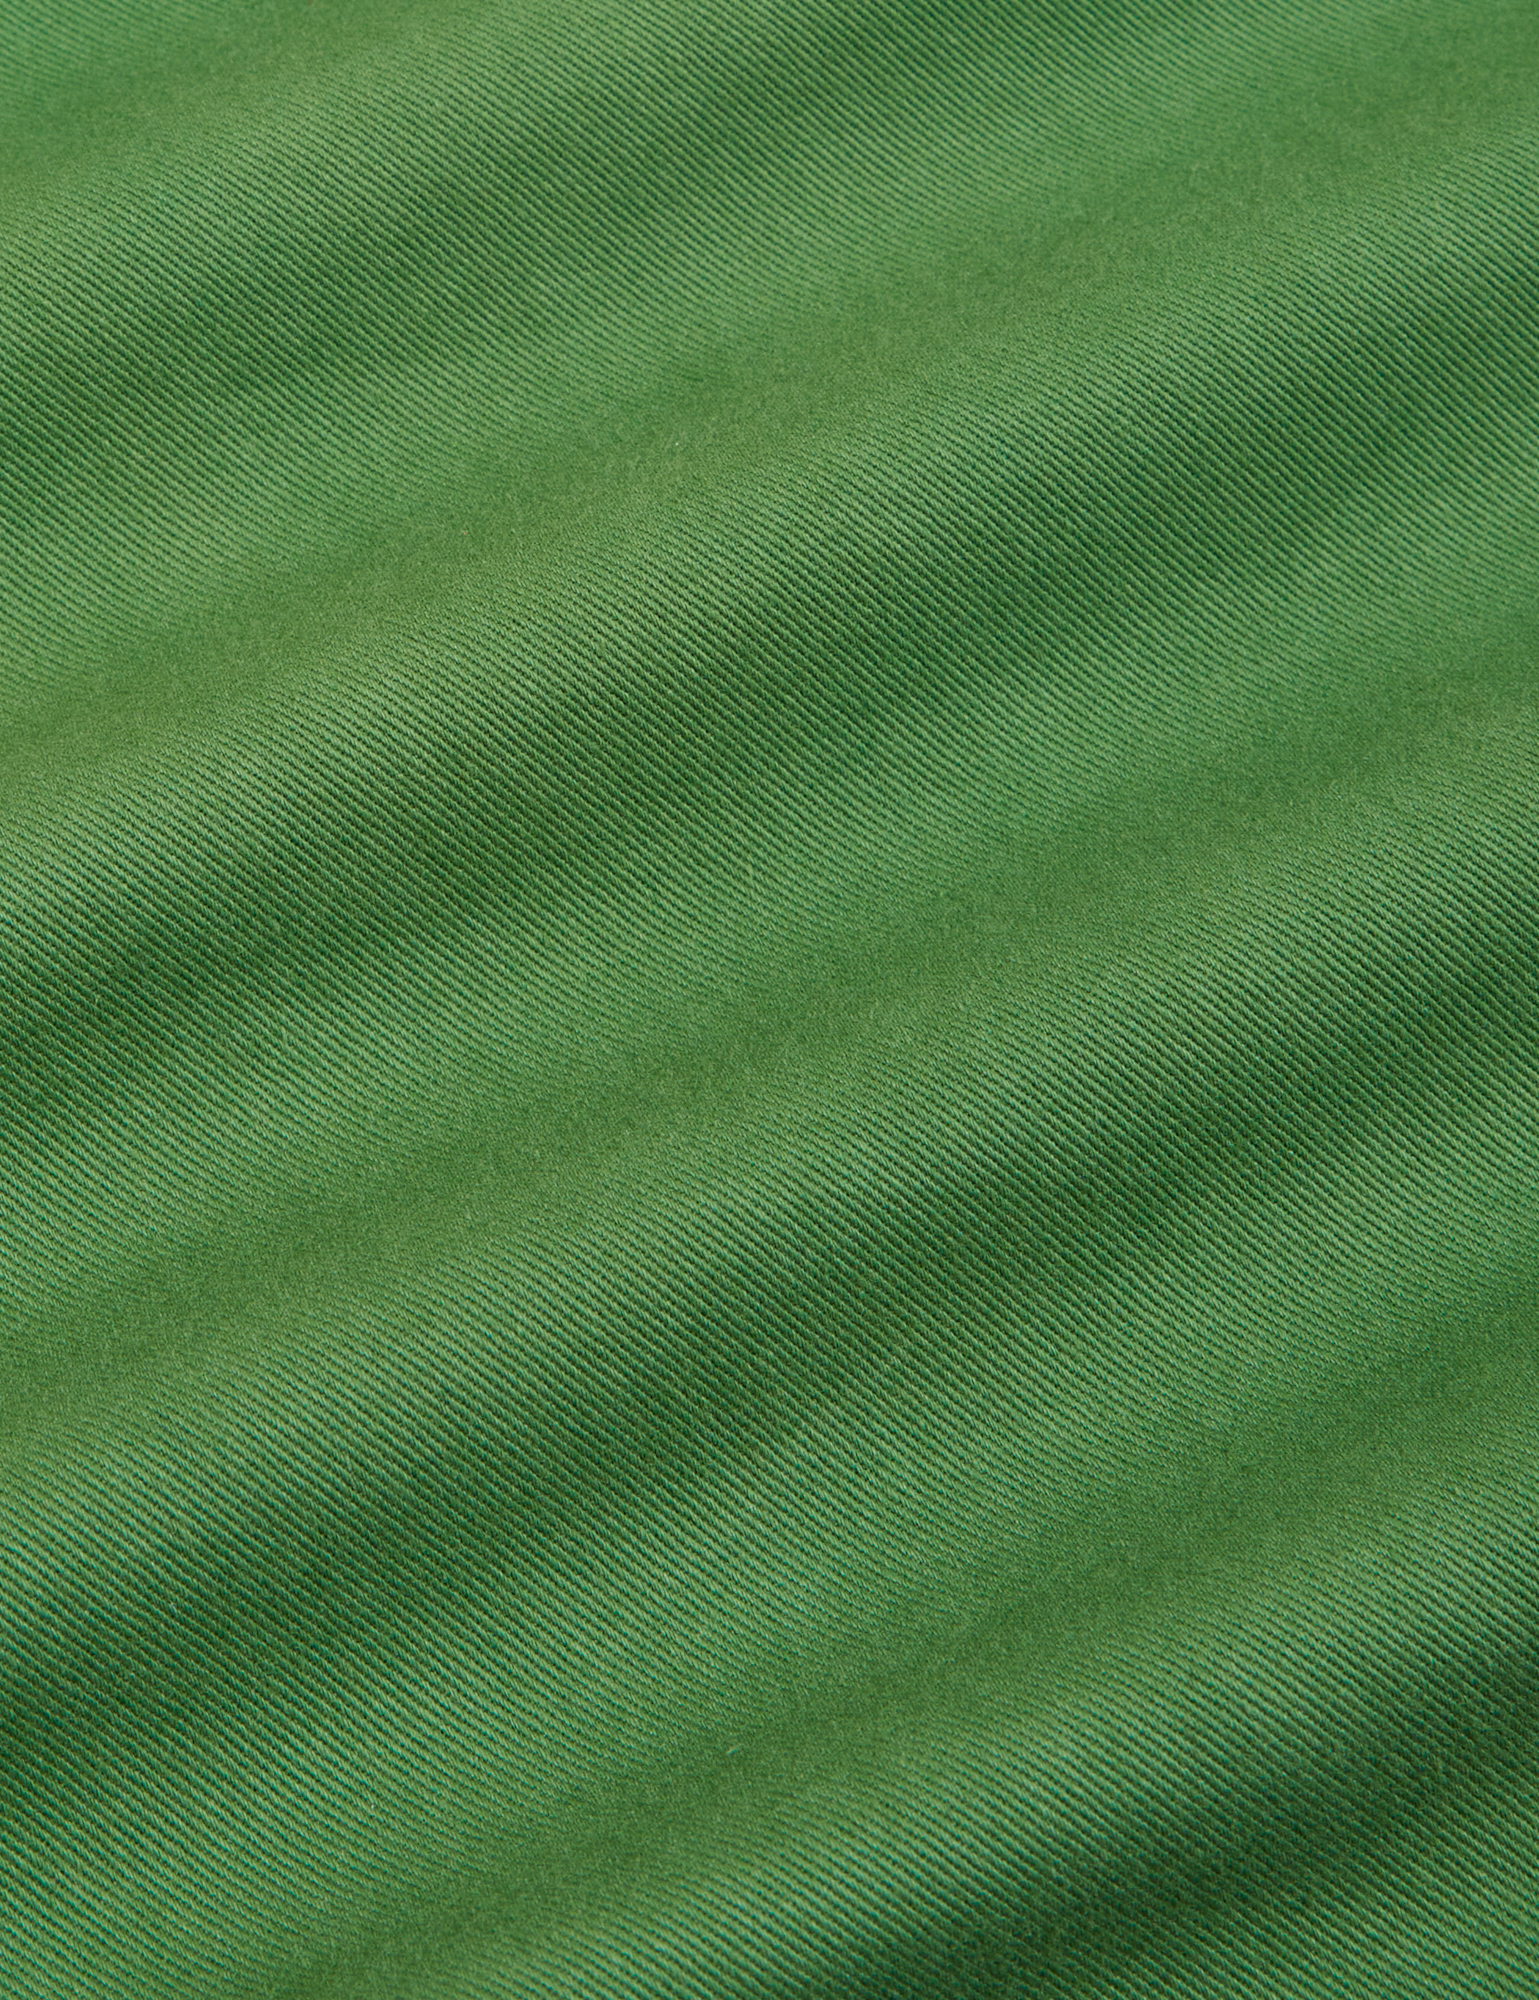 Oversize Overshirt in Lawn Green fabric detail close up